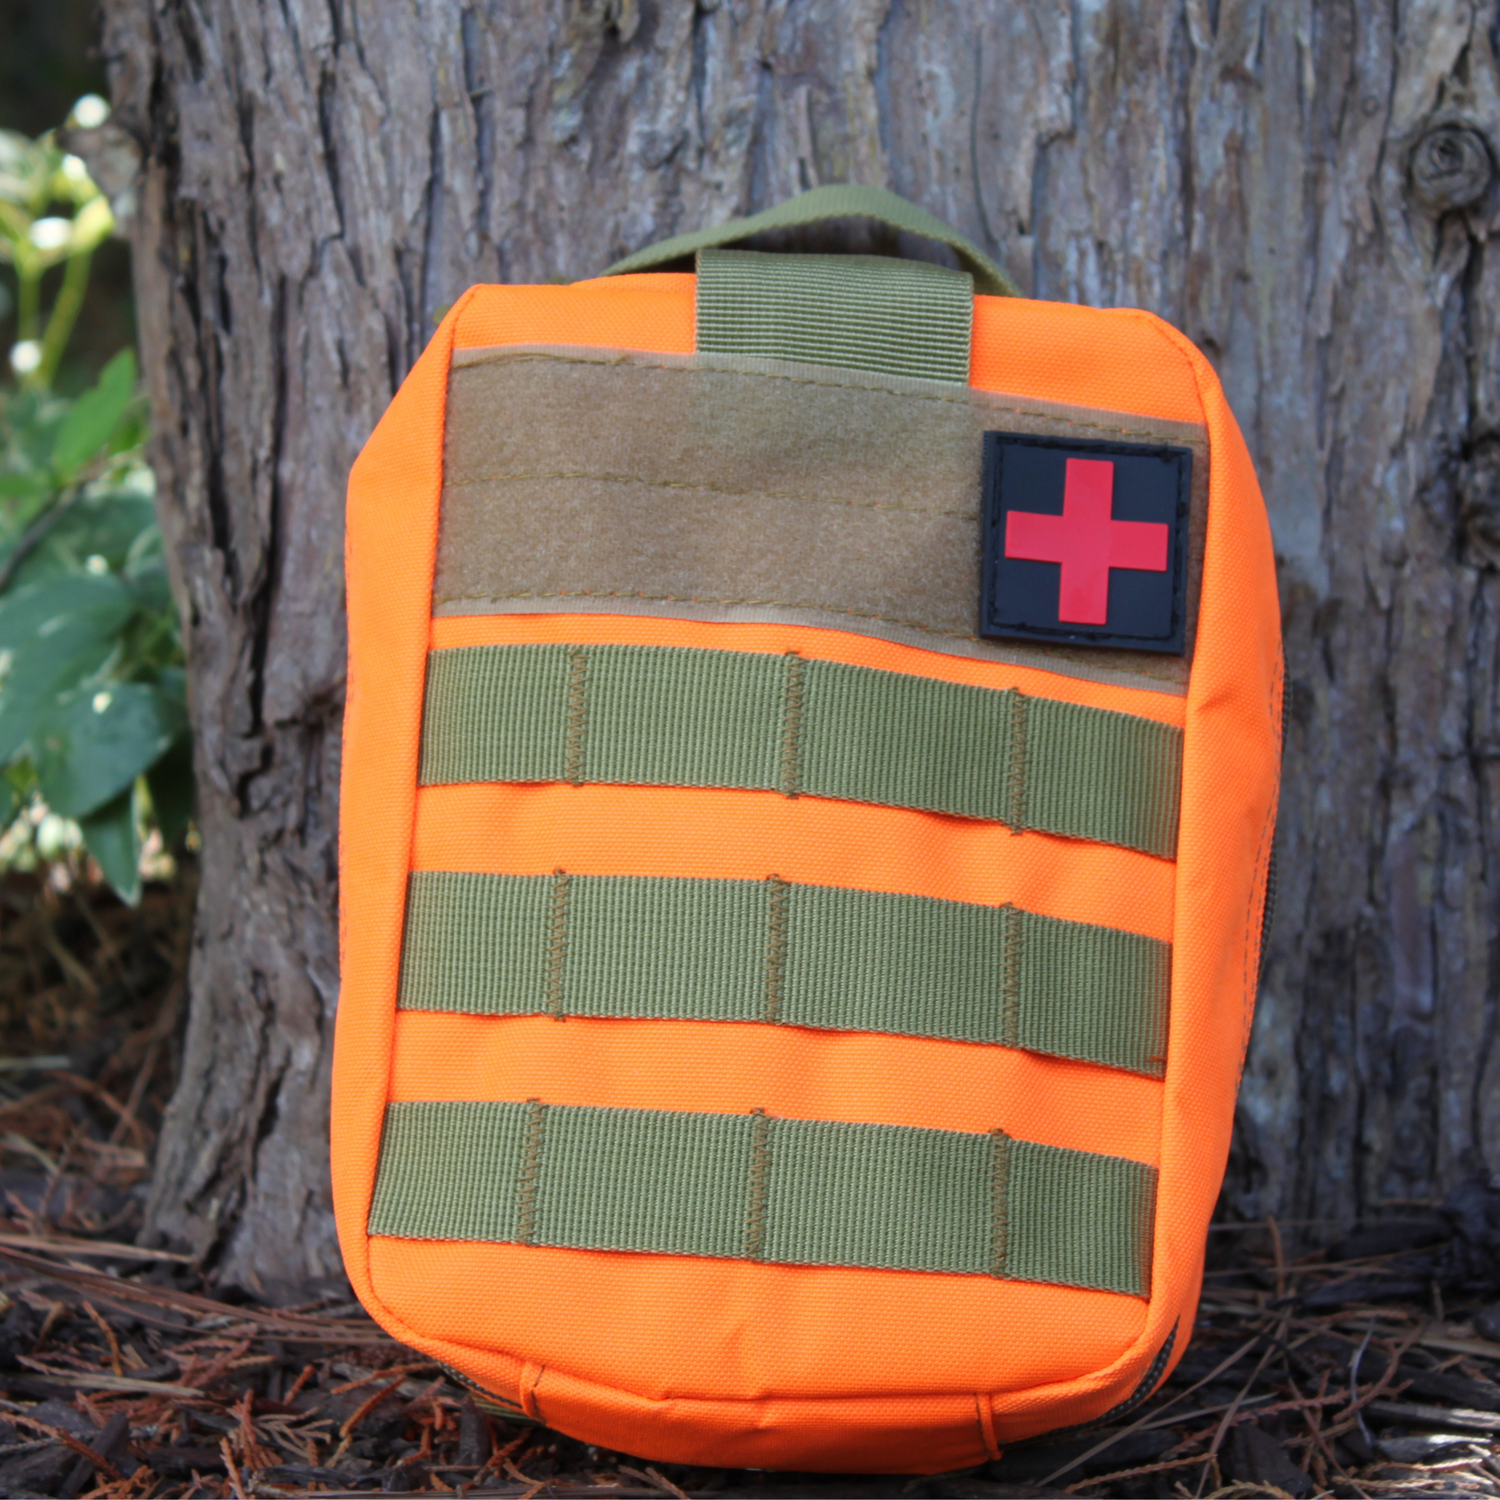 KIT 142 is a survival emergency kit for outdoor adventurers that includes 142 essential items, such as a heat-reflective emergency blanket, a tactical folding pocket knife, a multifunctional hatchet, a small shovel, a defense whistle, a flashlight, glow sticks, and medical supplies. The kit is packed into a durable, water-resistant bag that makes it easy to carry and store.